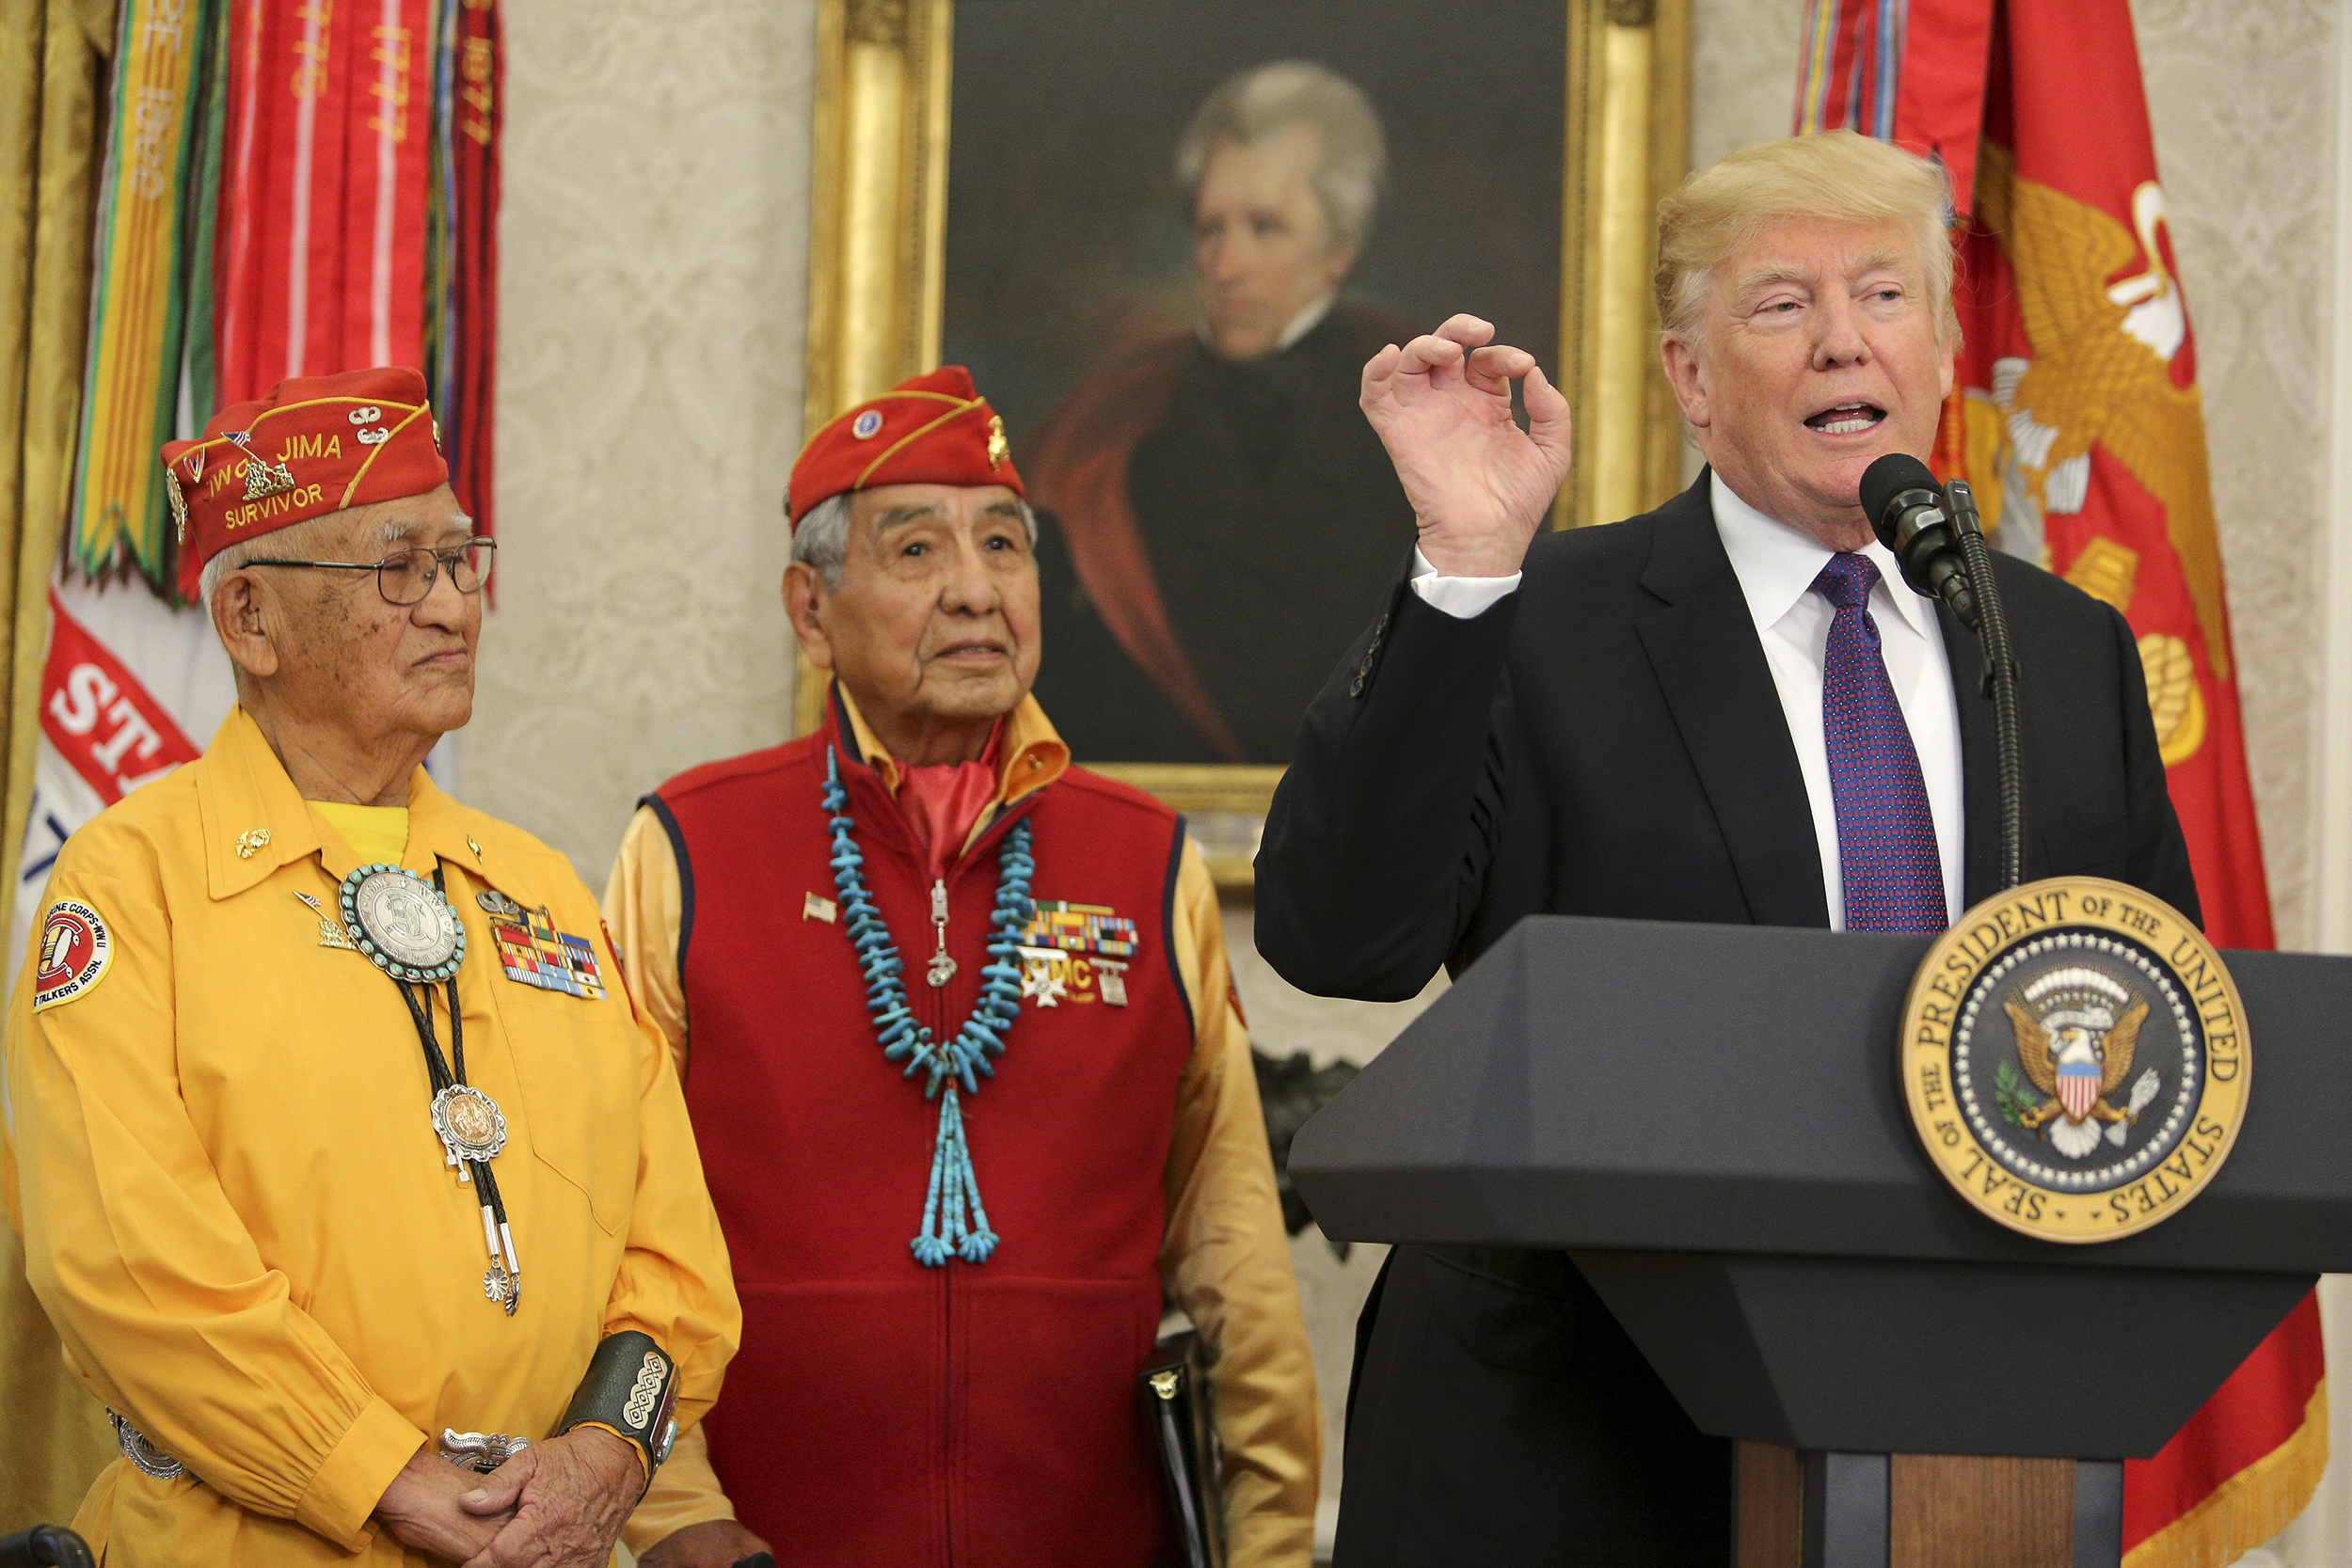 WASHINGTON, DC - NOVEMBER 27: (AFP OUT) U.S. President Donald Trump (R) speaks during an event honoring members of the Native American code talkers in the Oval Office of the White House, on November 27, 2017 in Washington, DC. Trump stated, "You were here long before any of us were here. Although we have a representative in Congress who they say was here a long time ago. They call her Pocahontas." in reference to his nickname for Sen. Elizabeth Warren. (Photo by Oliver Contreras-Pool/Getty Images)